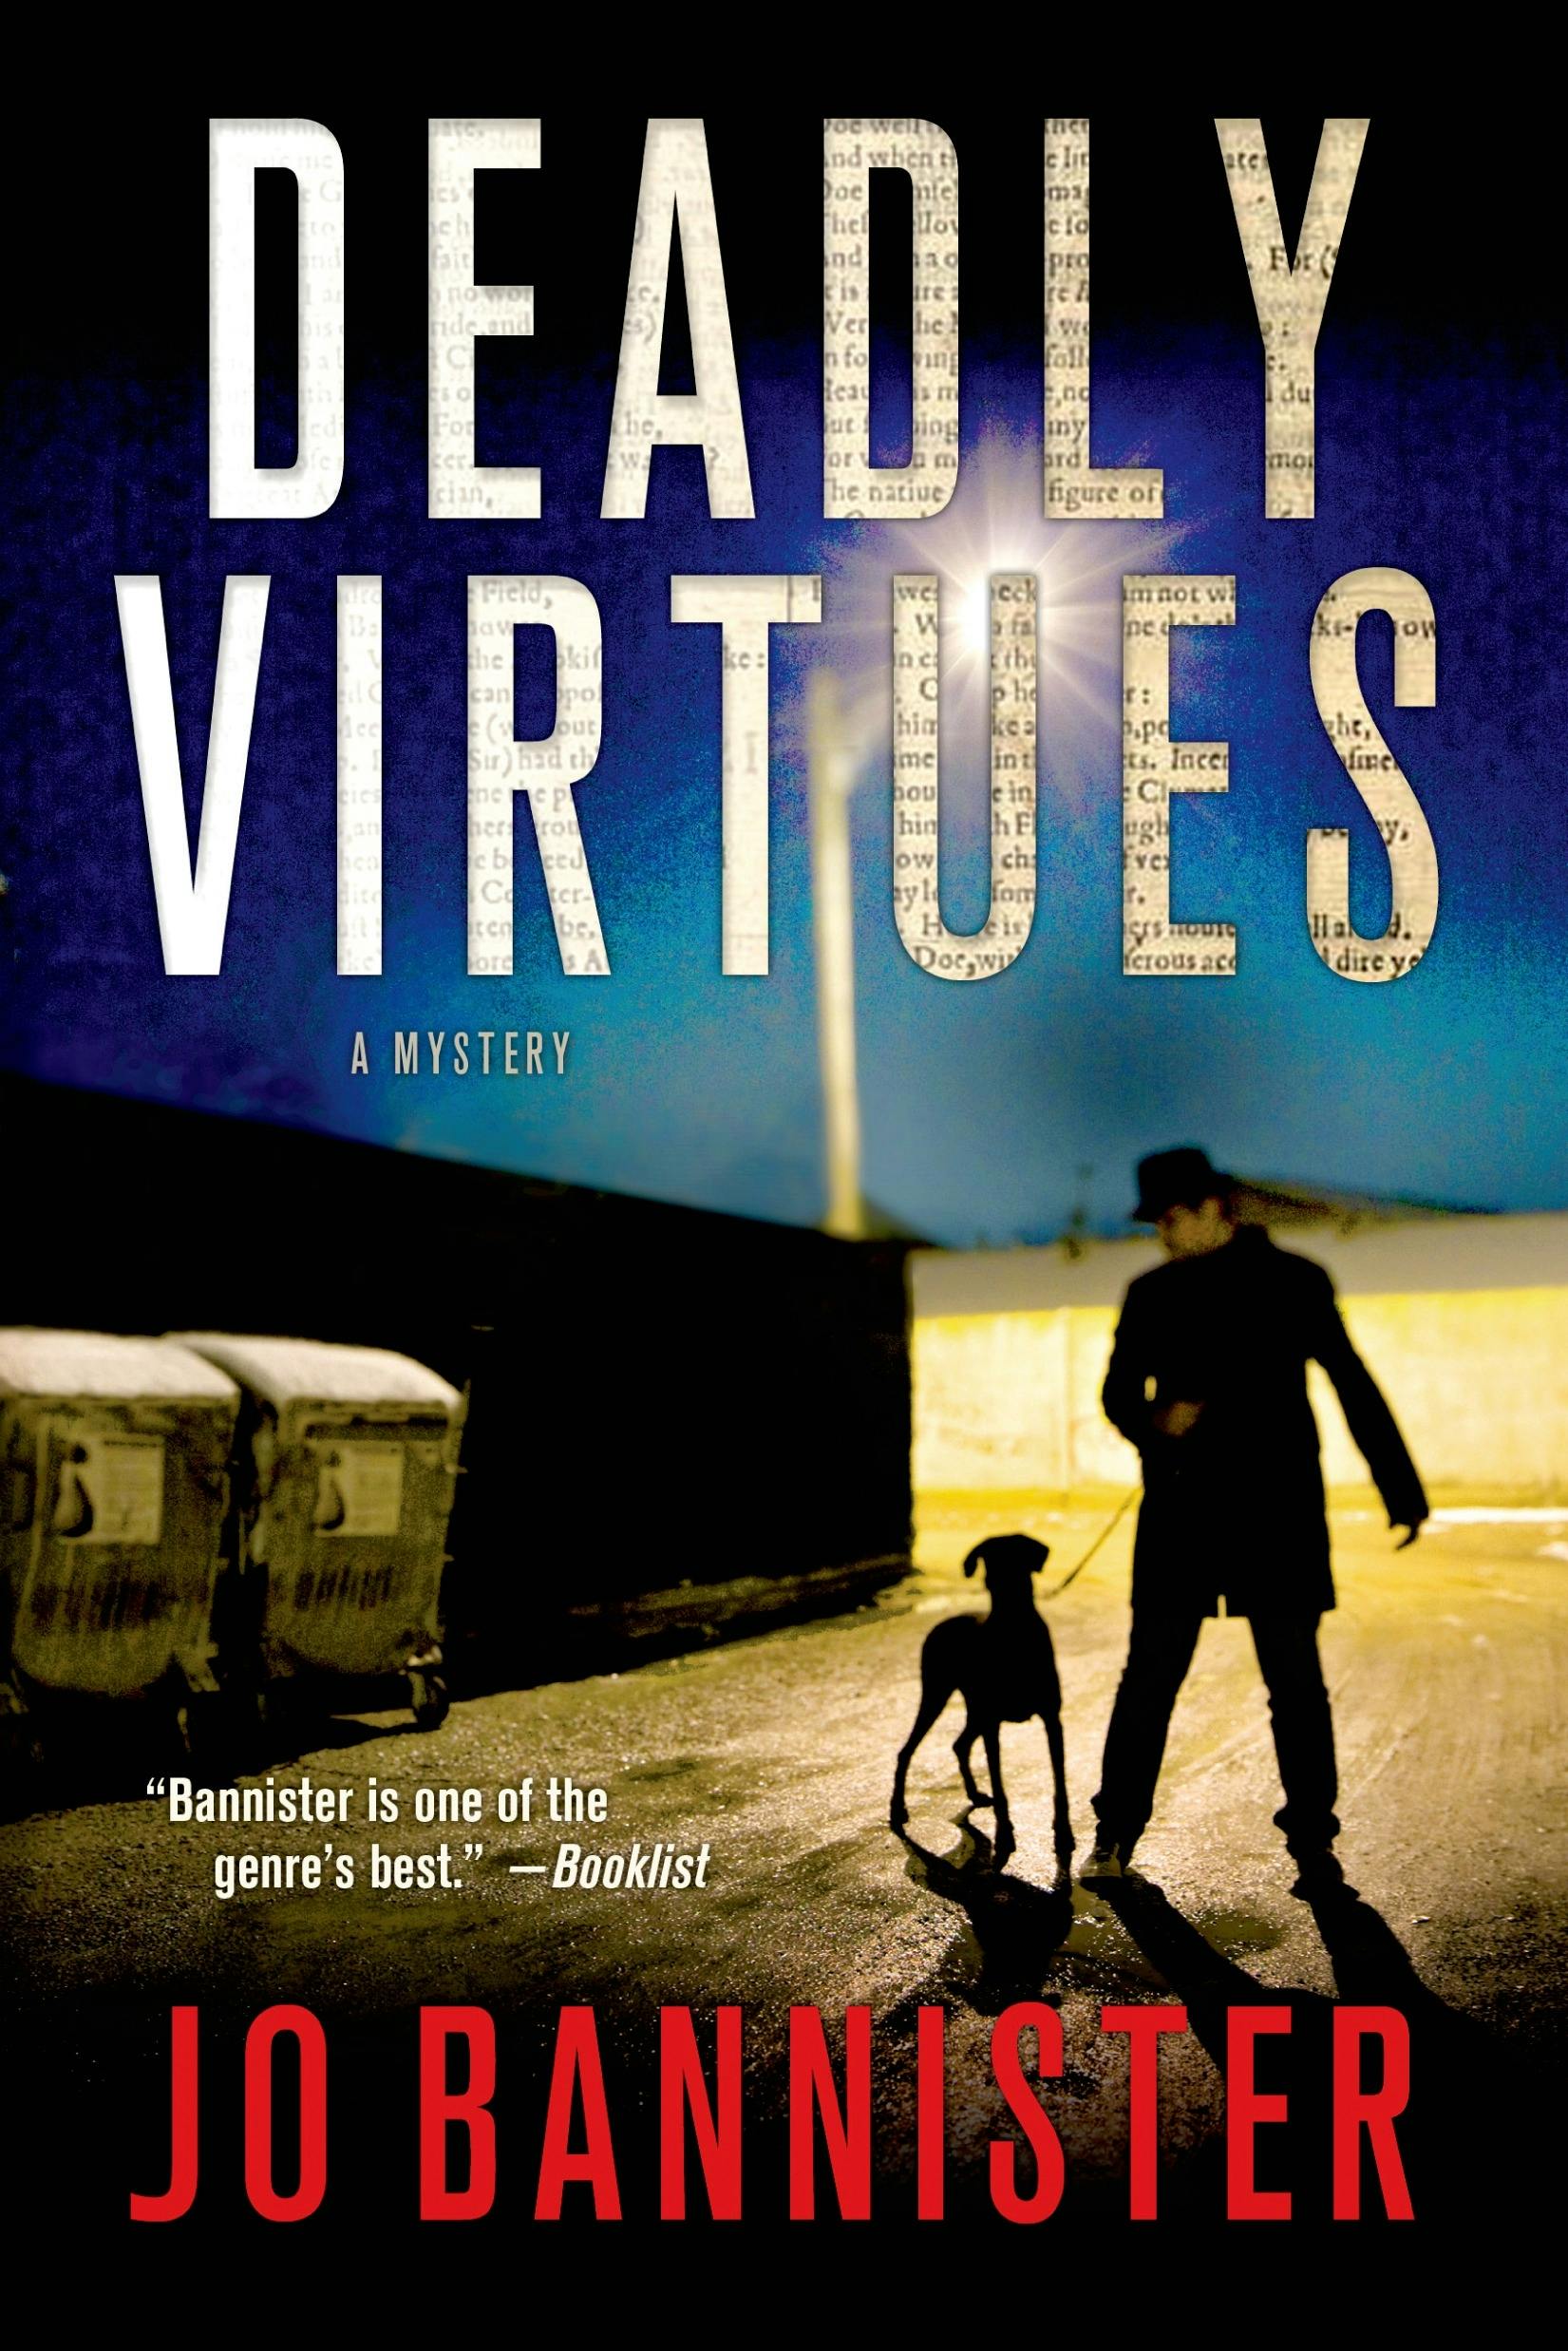 Deadly Virtues